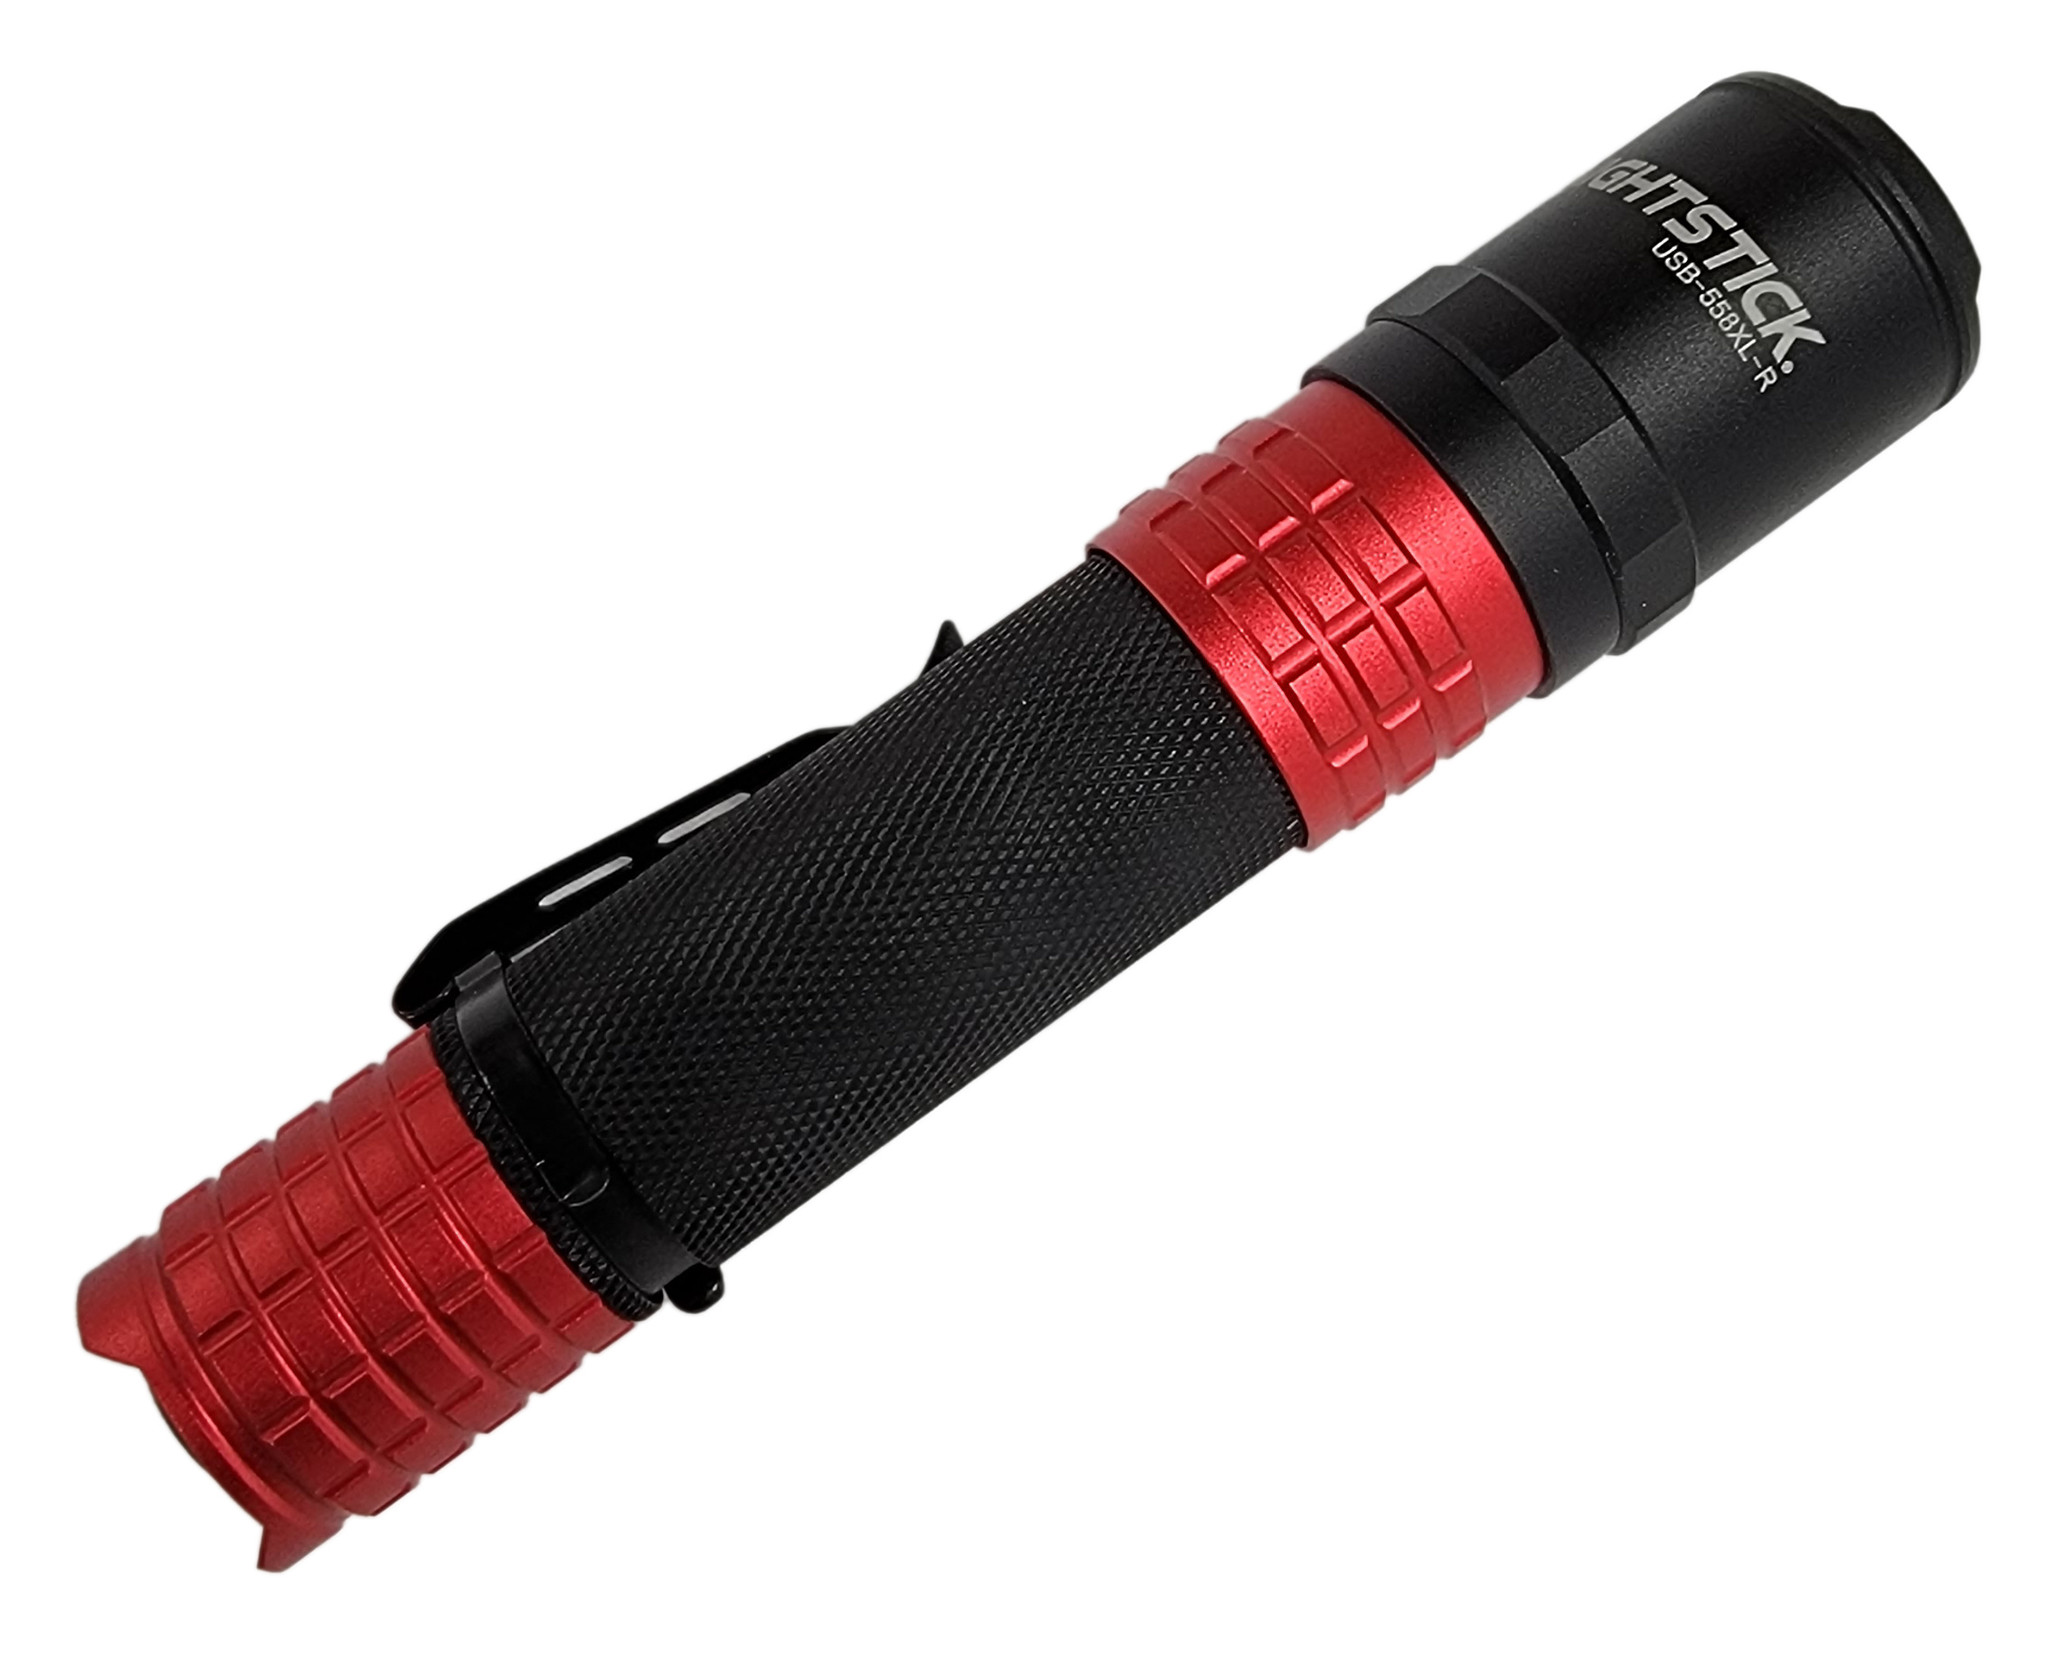 Nightstick Nightstick USB Tactical Flashlight with Holster